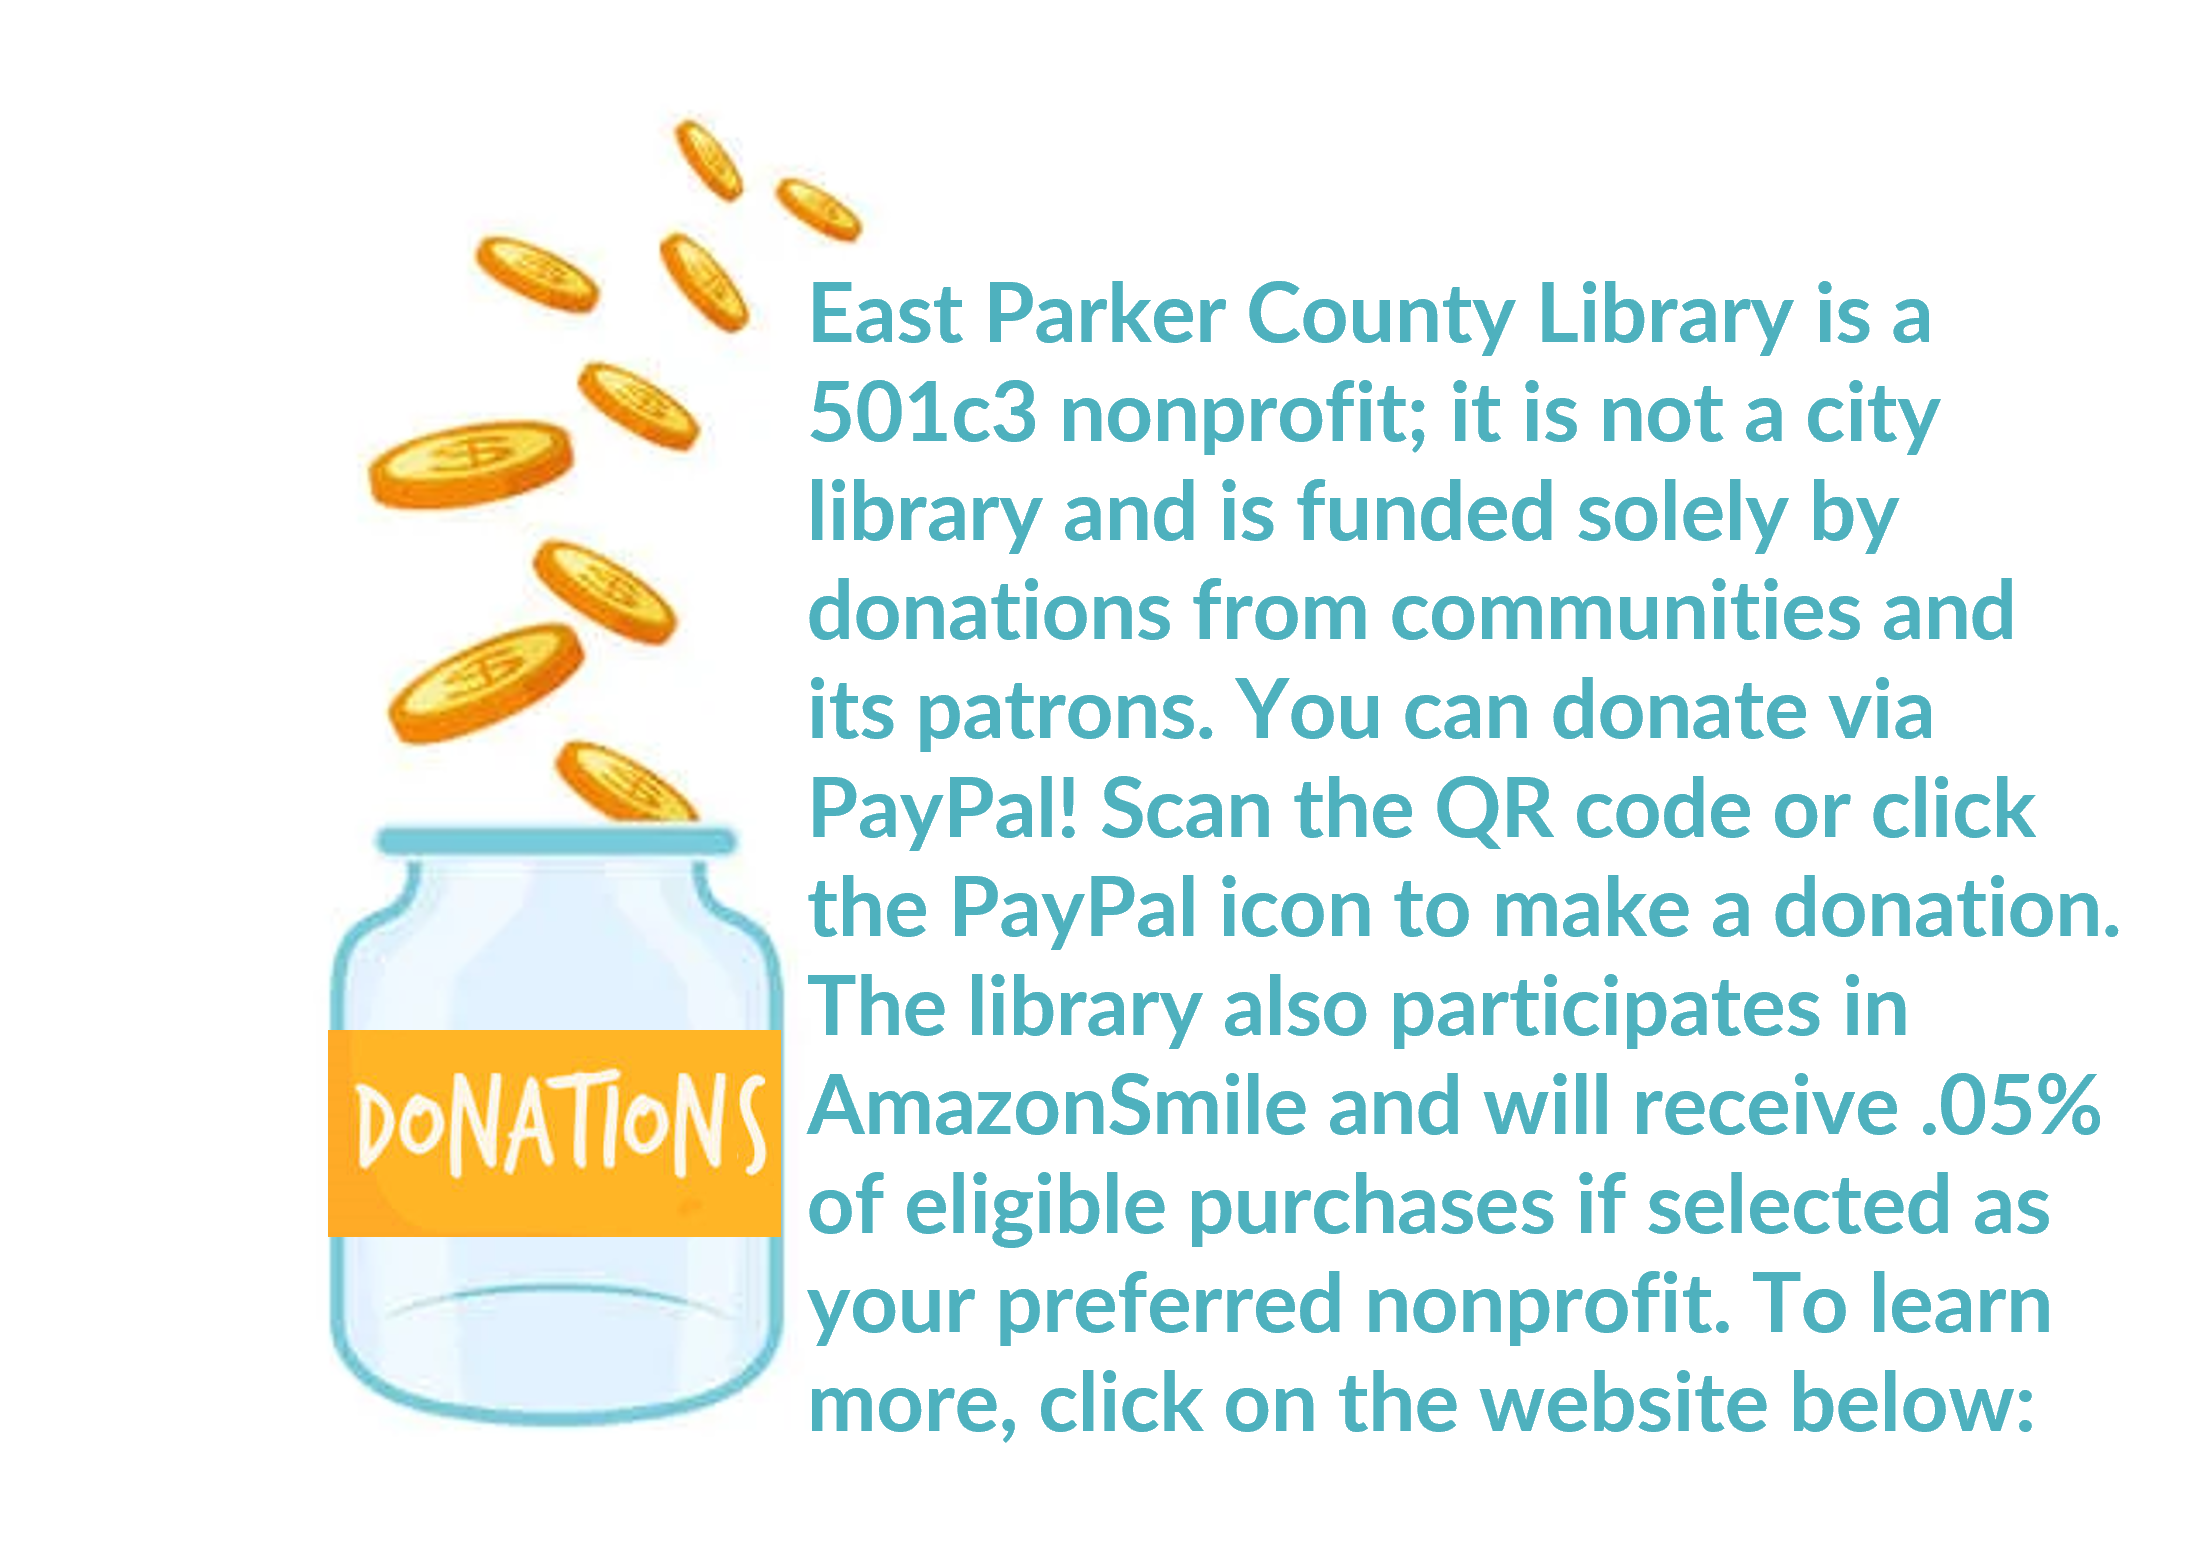 EPCL donation image for website.png